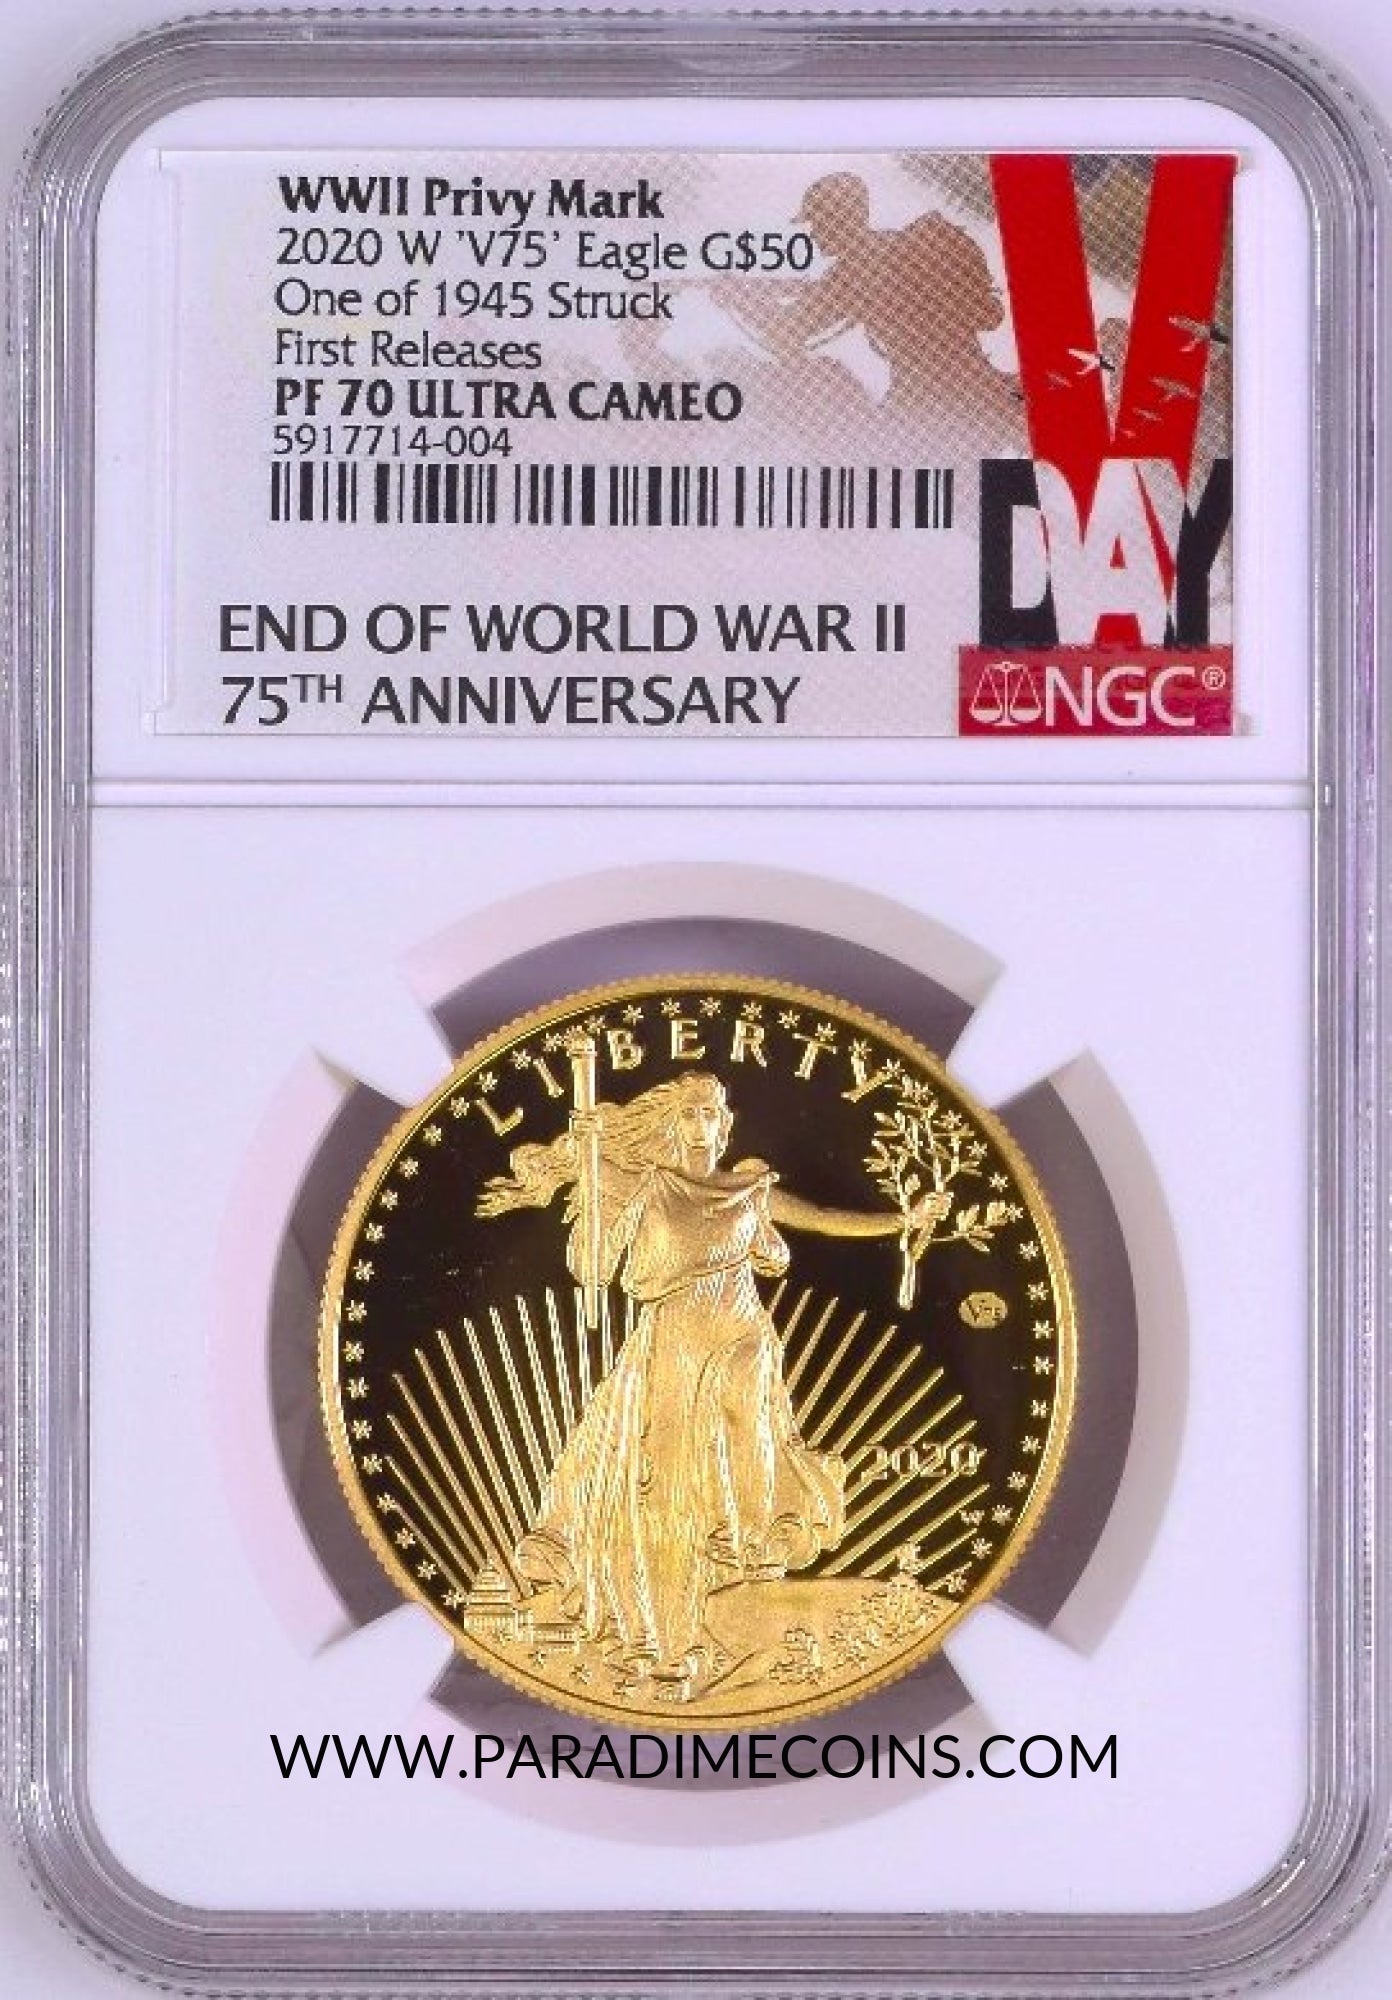 2020-W V75 $50 WWII Privy NGC PF70UCAM First Releases 20XE American Gold Eagle #1 - Paradime Coins | PCGS NGC CACG CAC Rare US Numismatic Coins For Sale